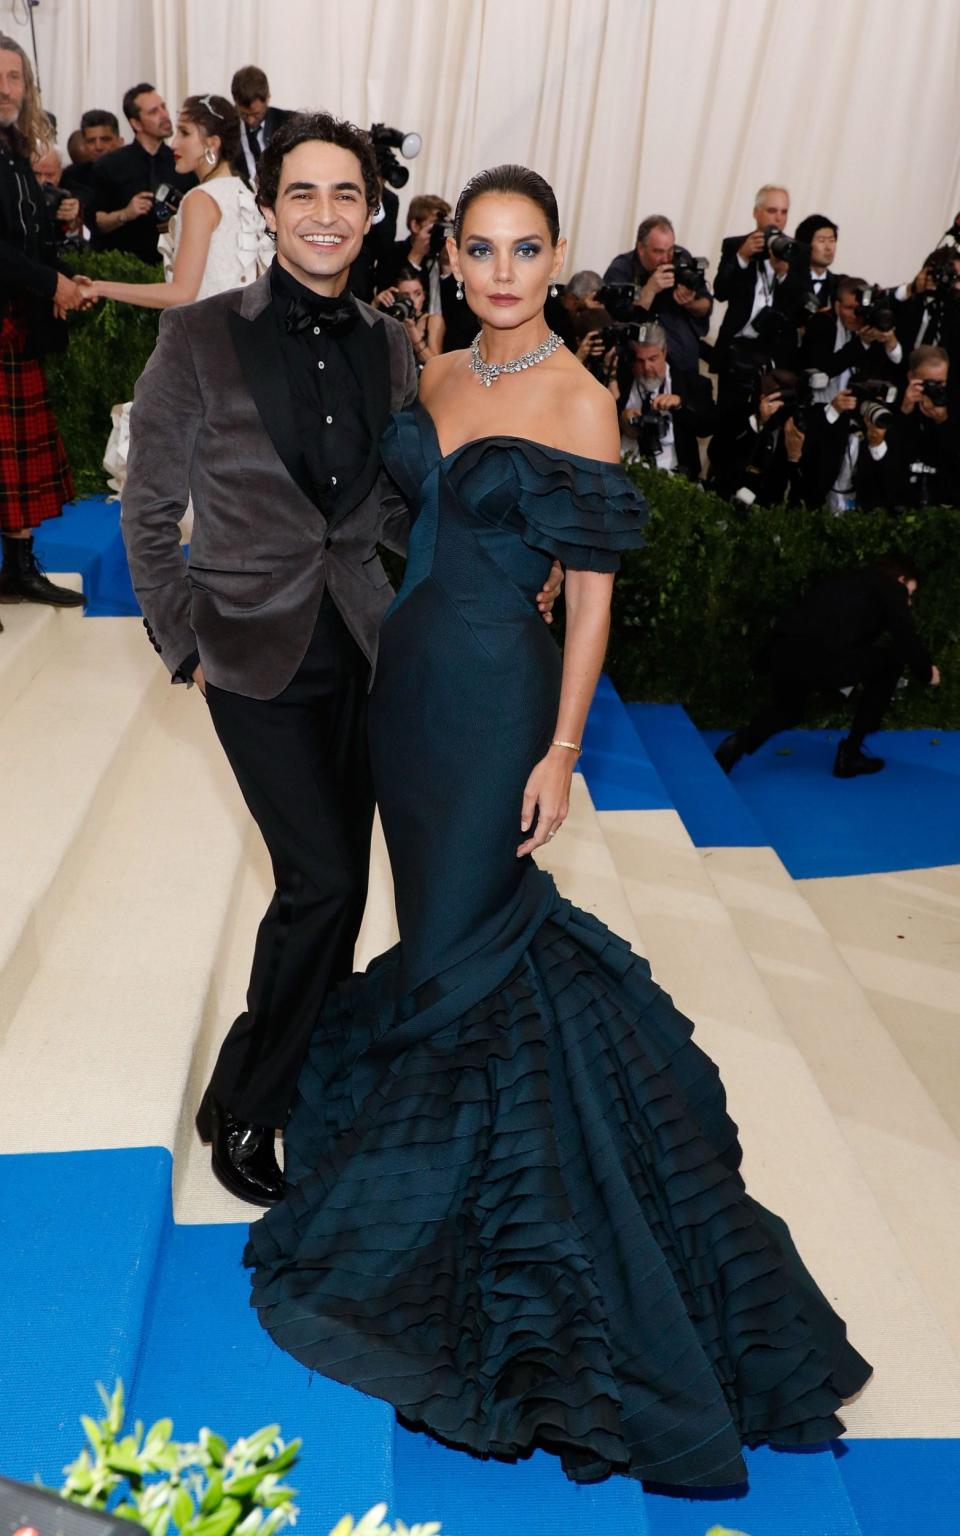 Katie Holmes and Posen attend the 2017 Met Gala